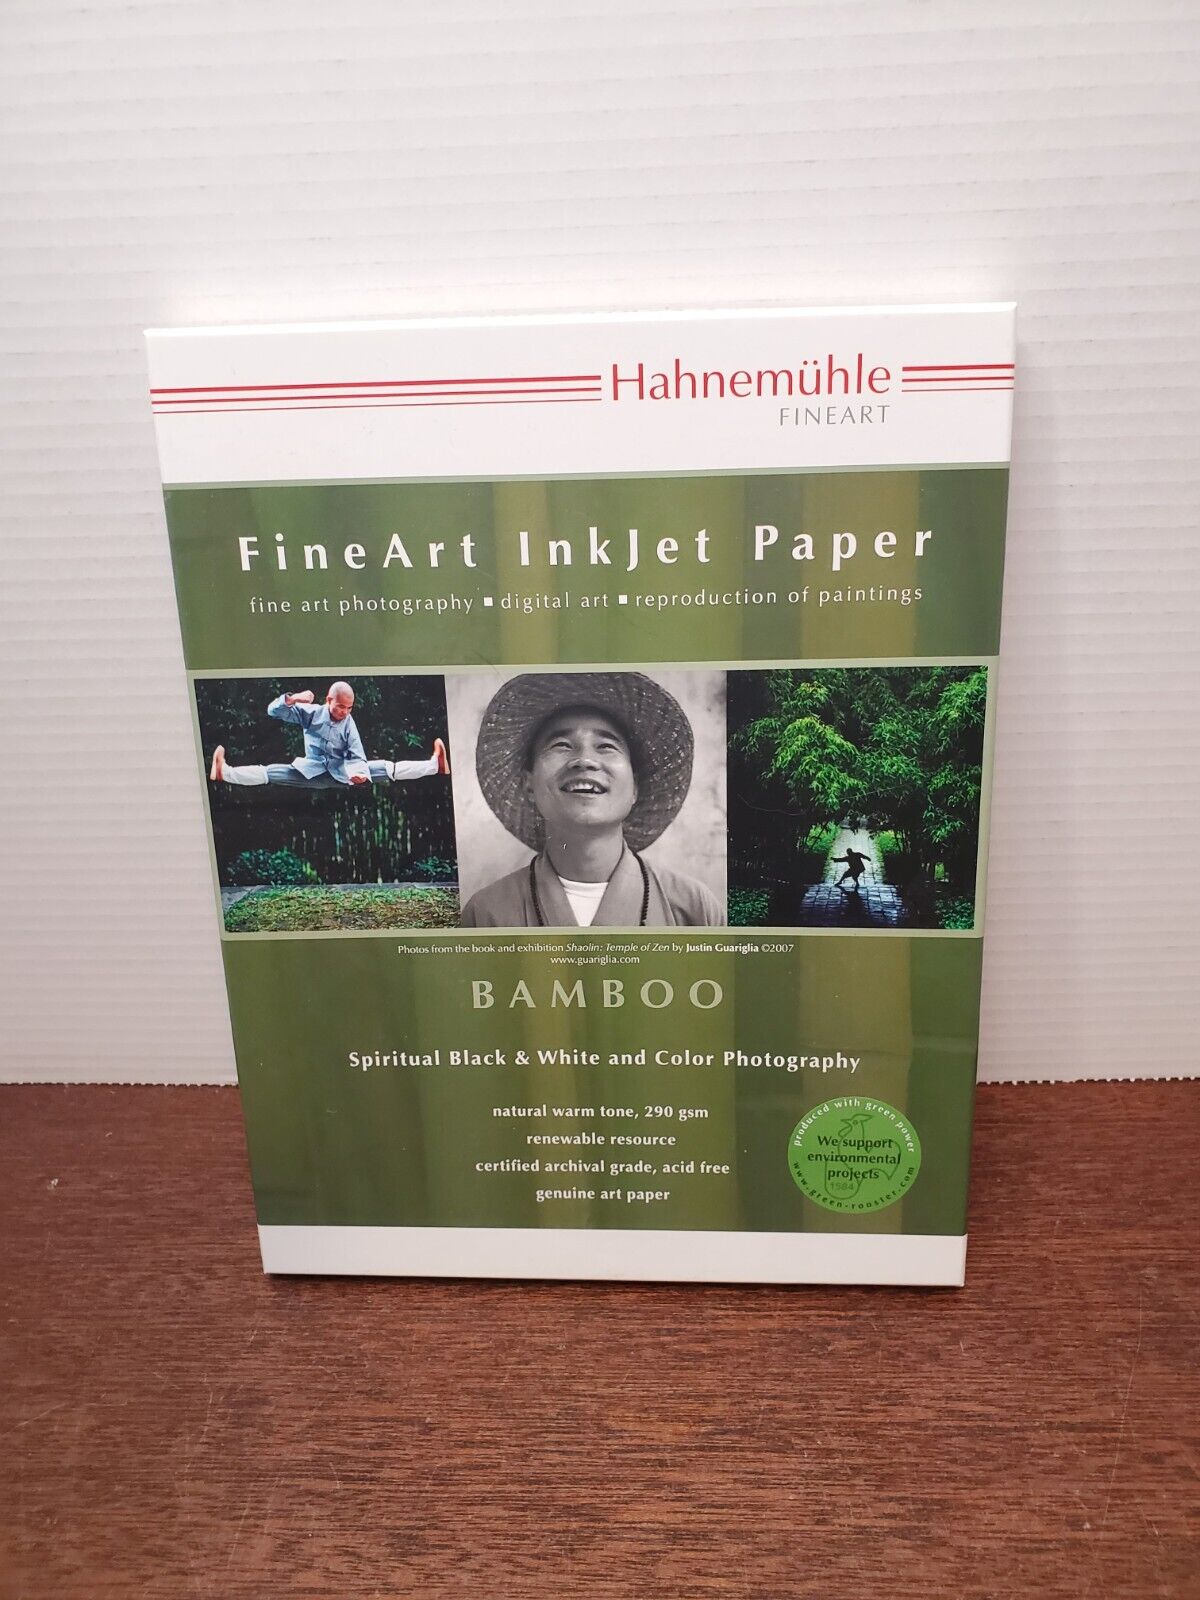 Hahnemuhle Bamboo FineArt Inkjet Warm Tone Paper 290 gsm 8.5